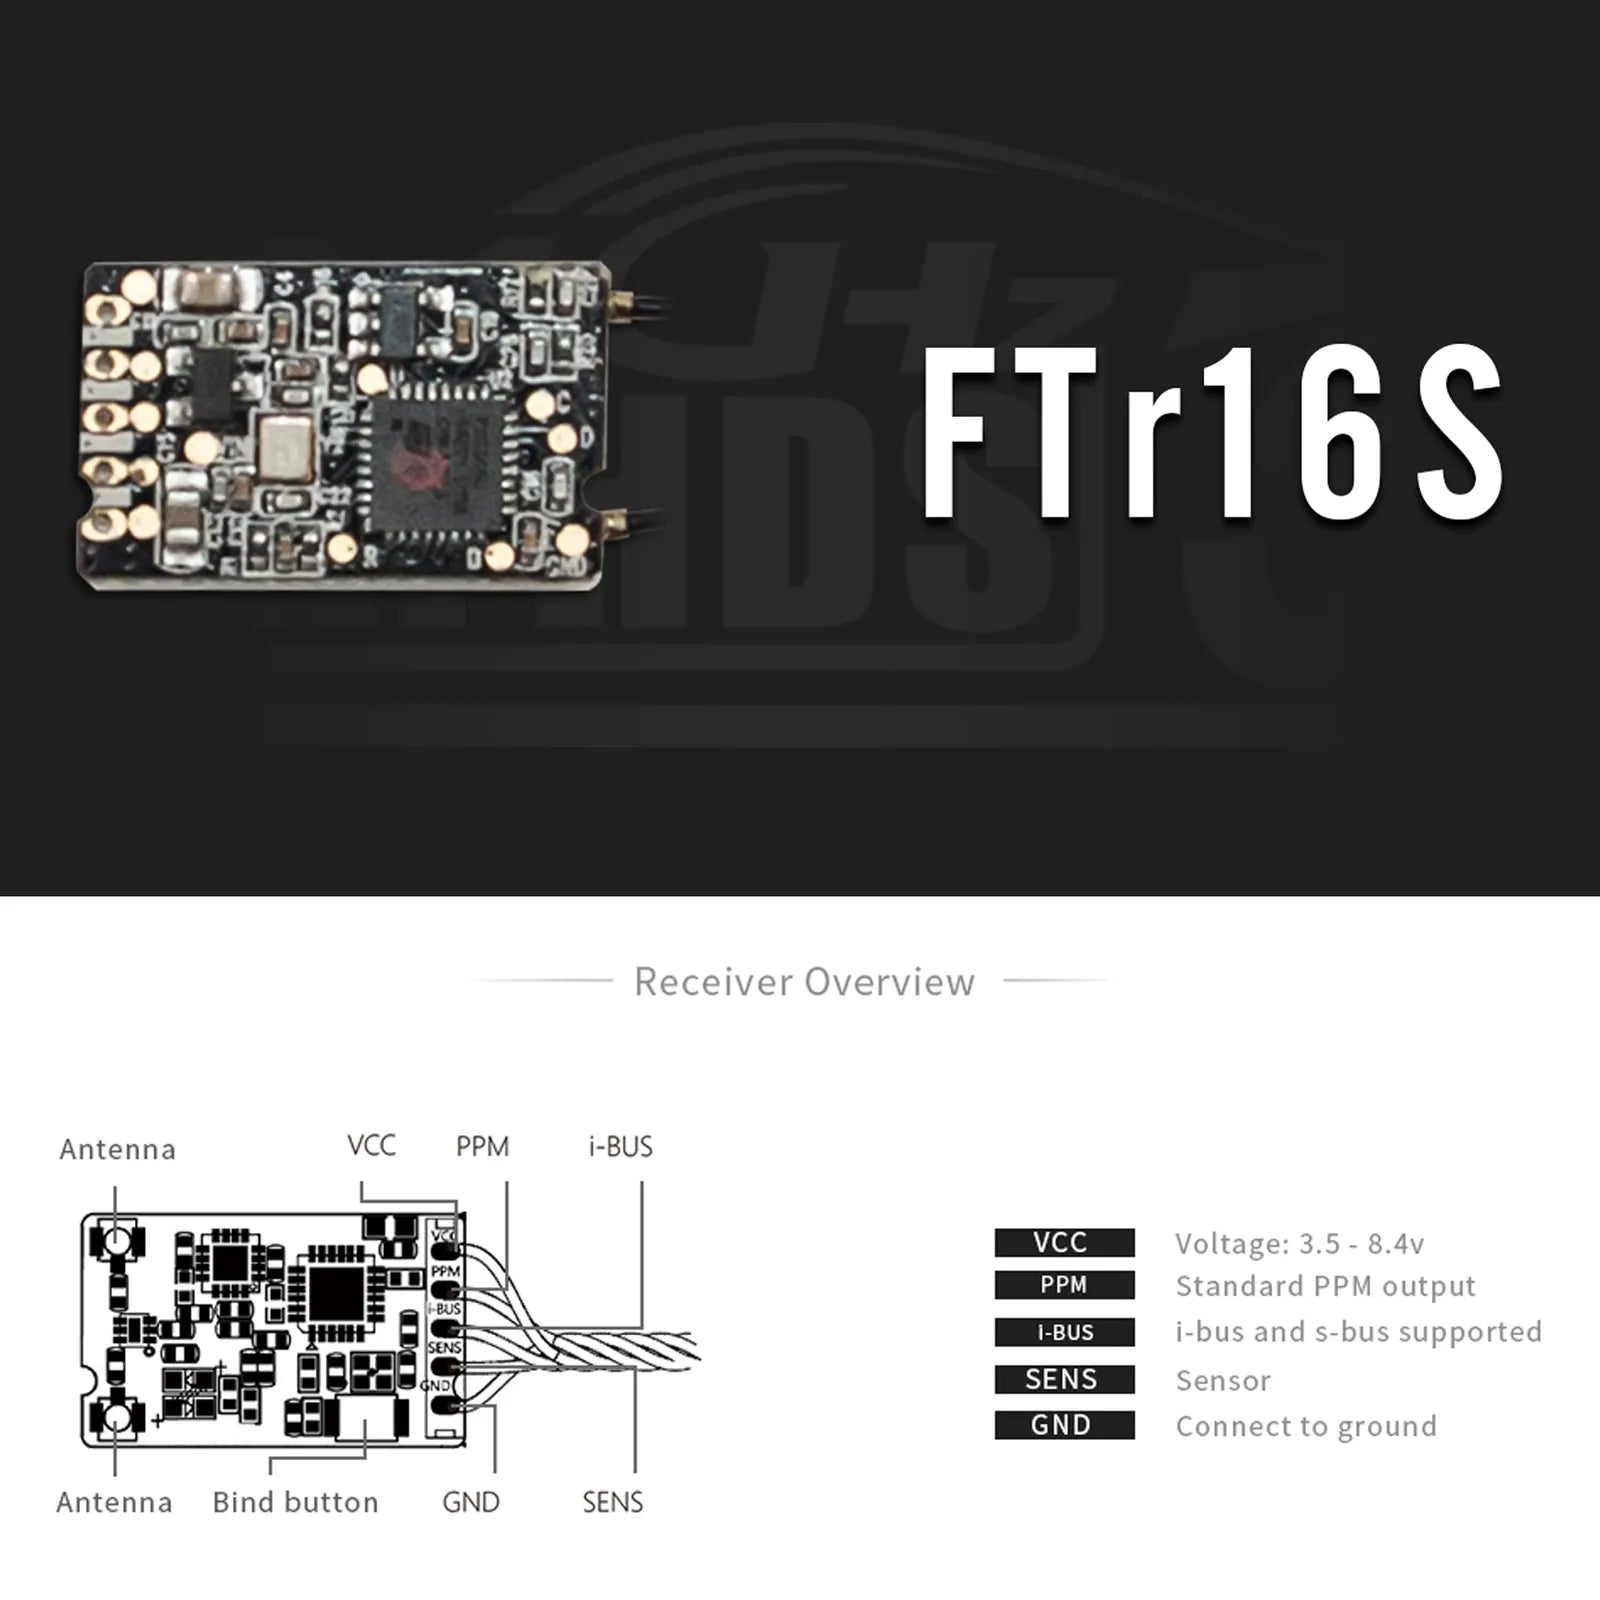 Ee 3 FTr16S Receiver Overview Antenna VCC PPM